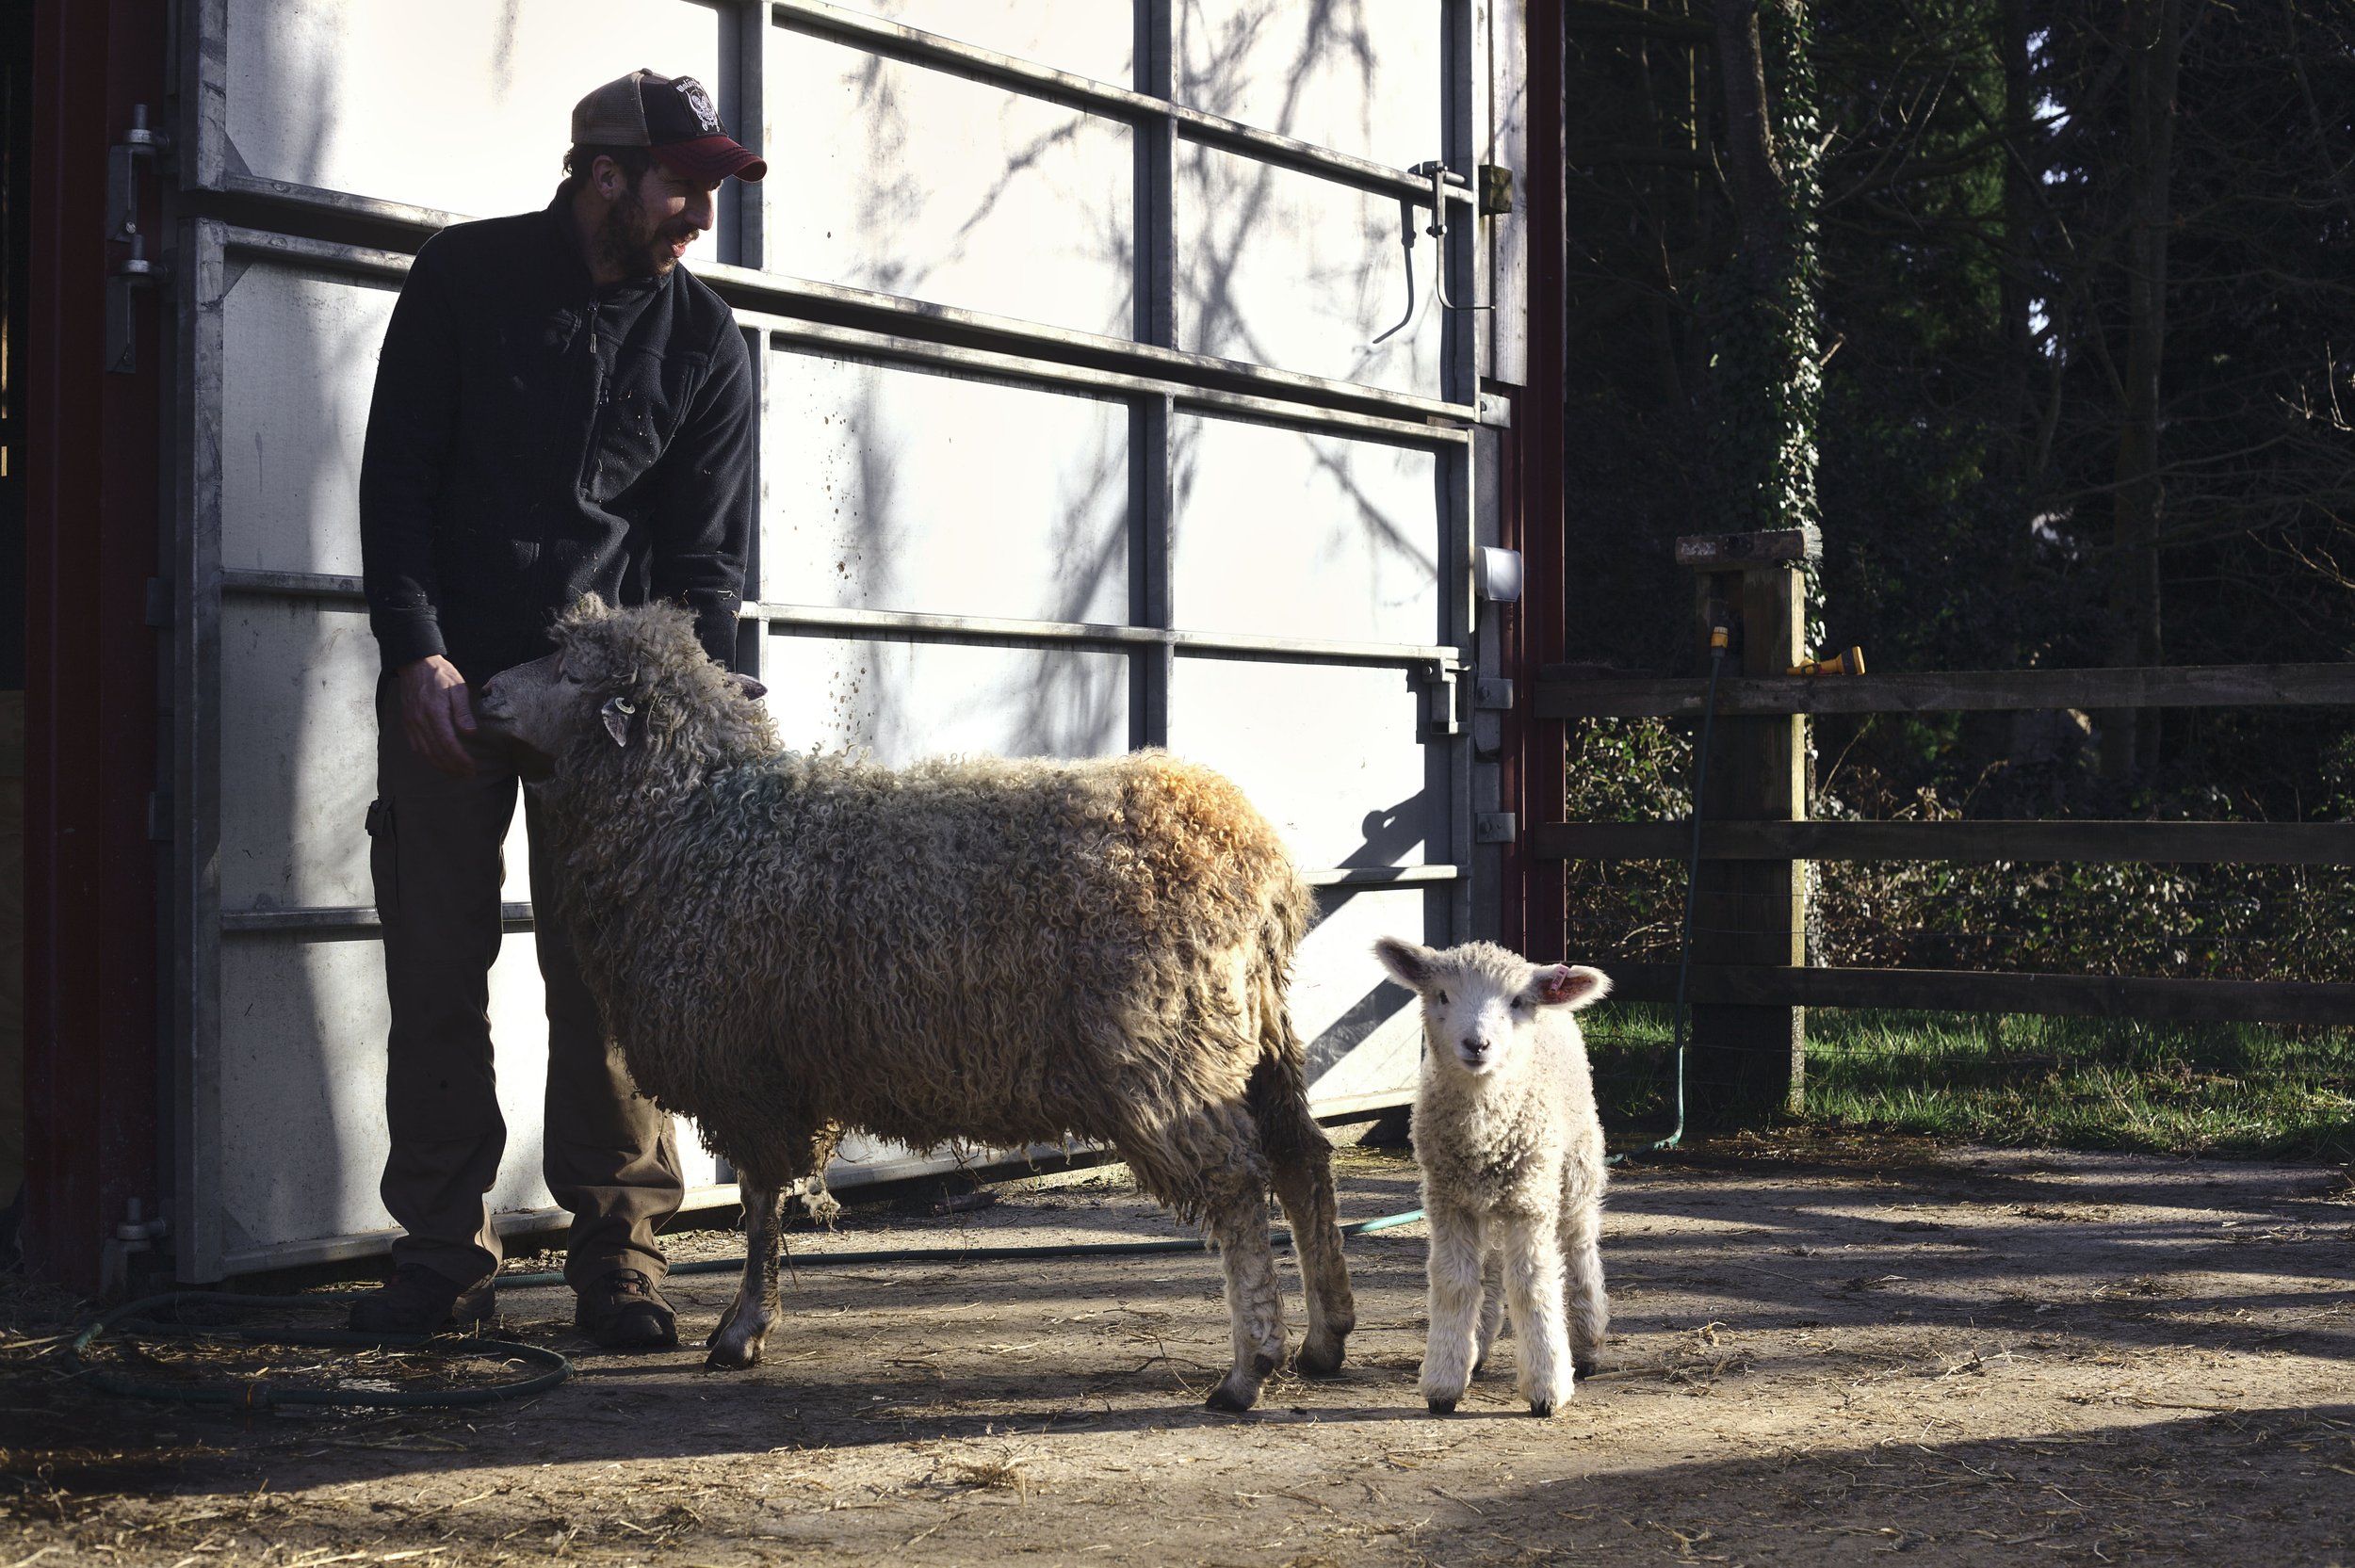  Tom manages the livestock and the landscape of the estate, optimizing grazing both for the welfare of the flock and the biodiversity of the valley. 